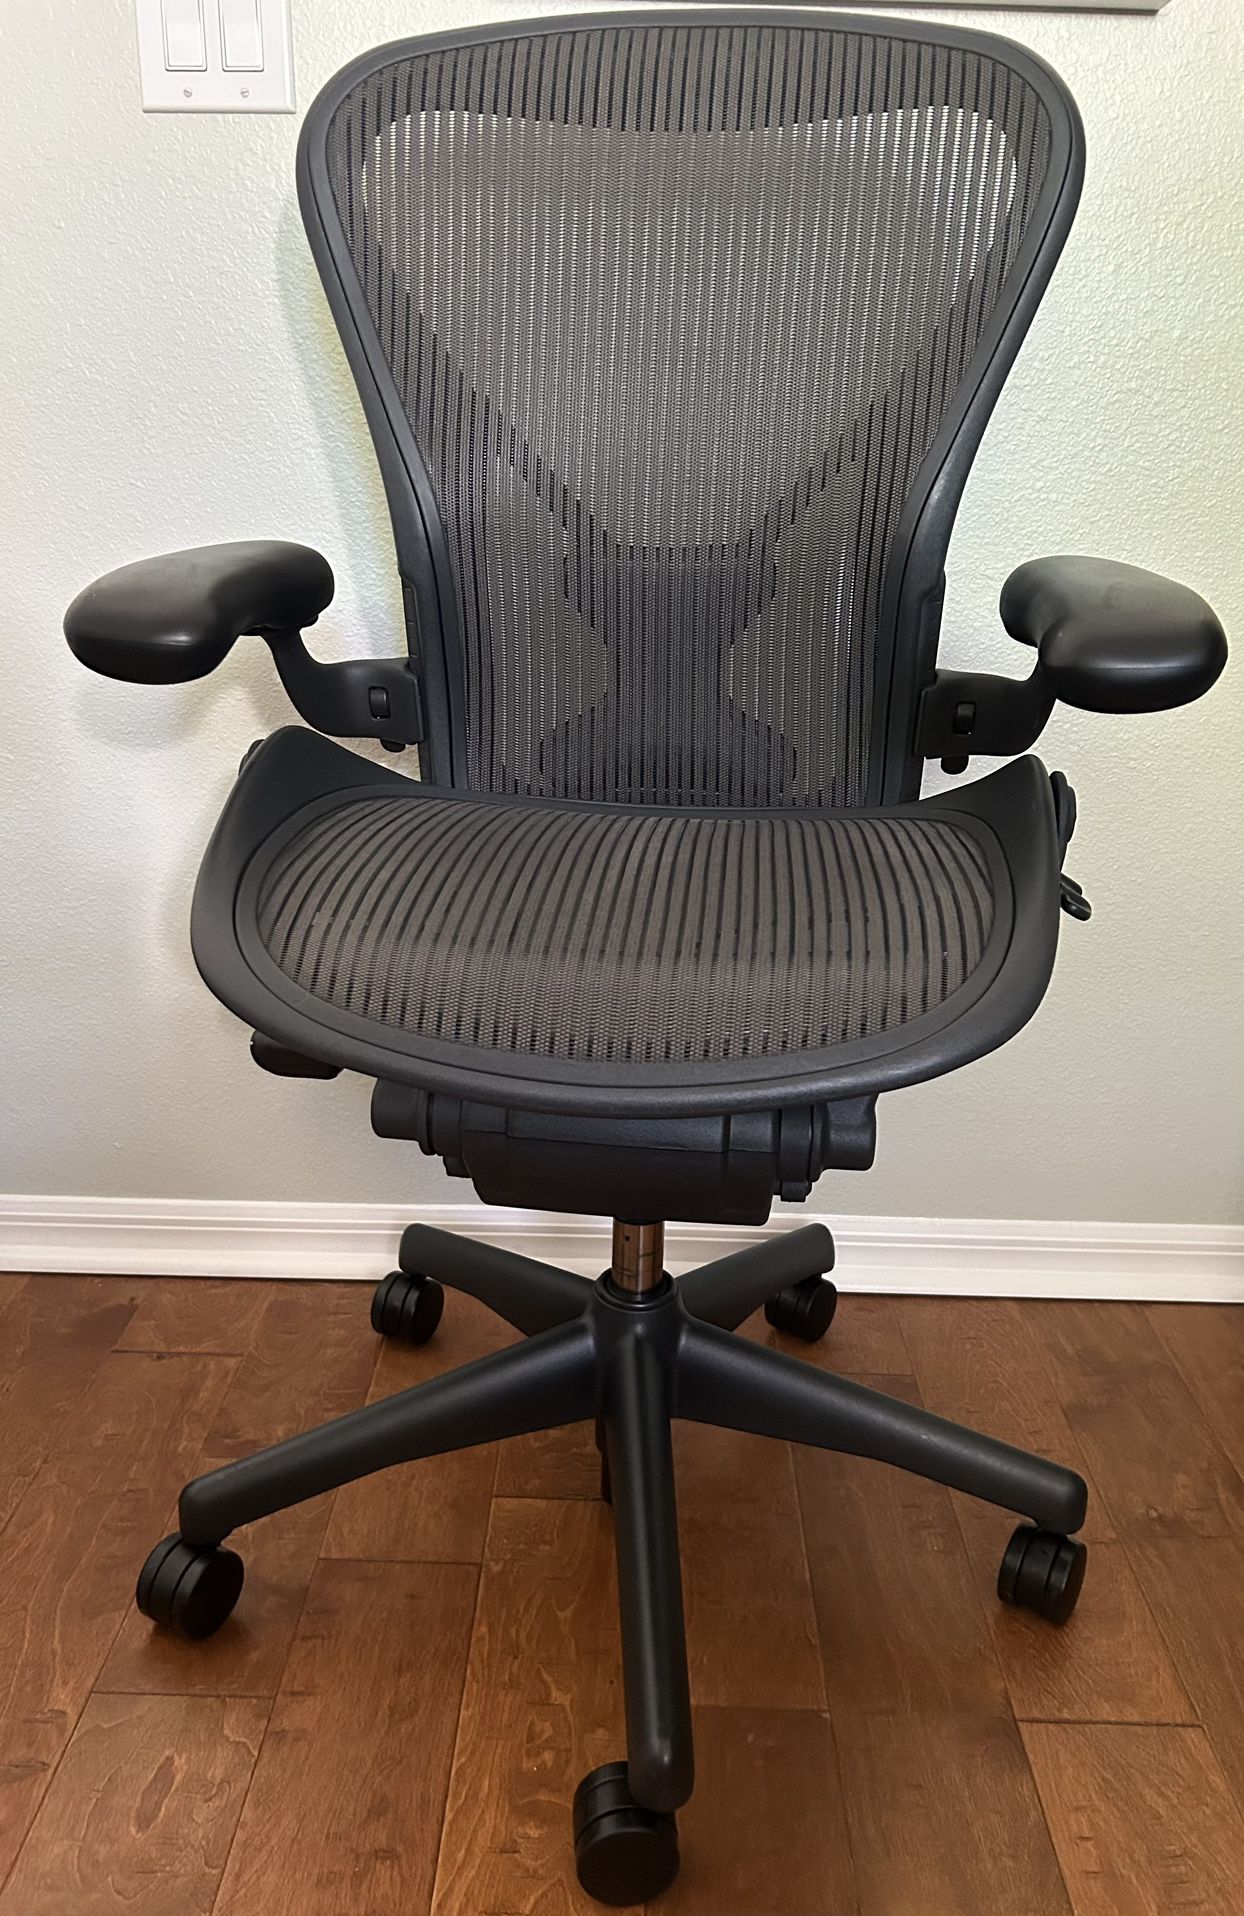 Herman Miller Aeron Chair, Highly Adjustable Posture Fit, Carbon, Size B